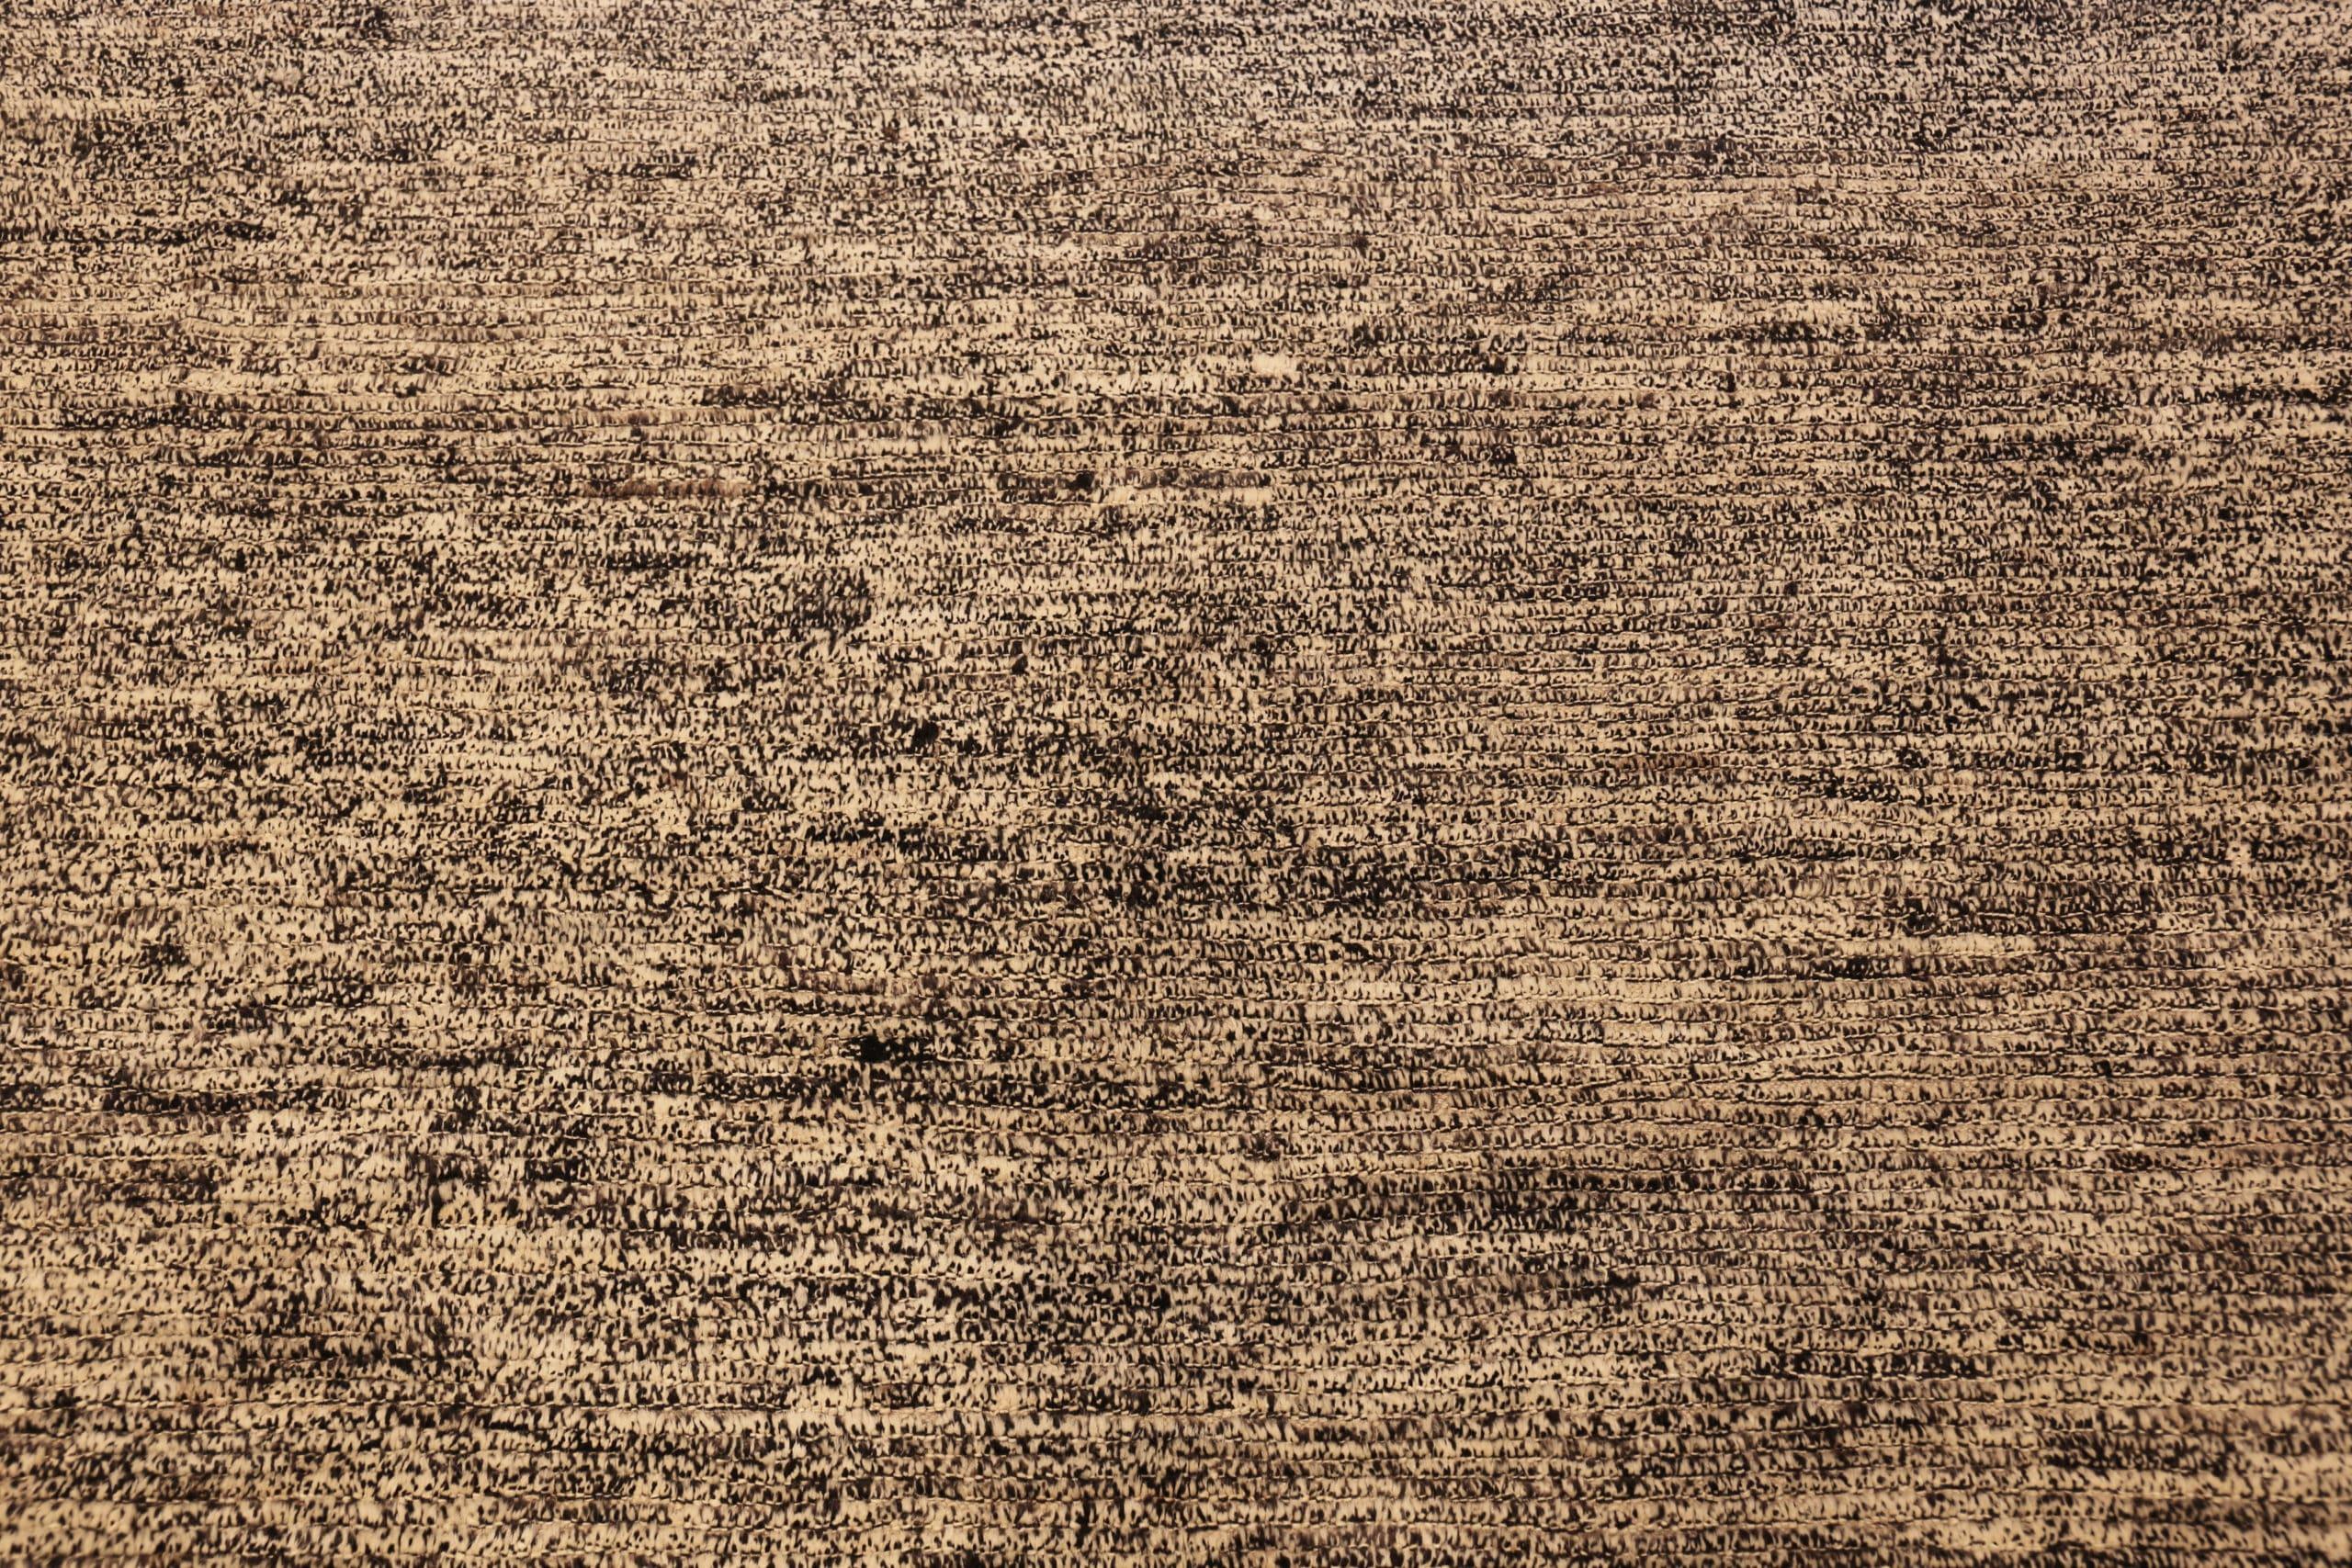 Textured Beige Modern Distressed Rug, Country of Origin: Afghanistan, Circa date: Modern. Size: 9 ft 6 in x 11 ft 6 in (2.9 m x 3.51 m)
 